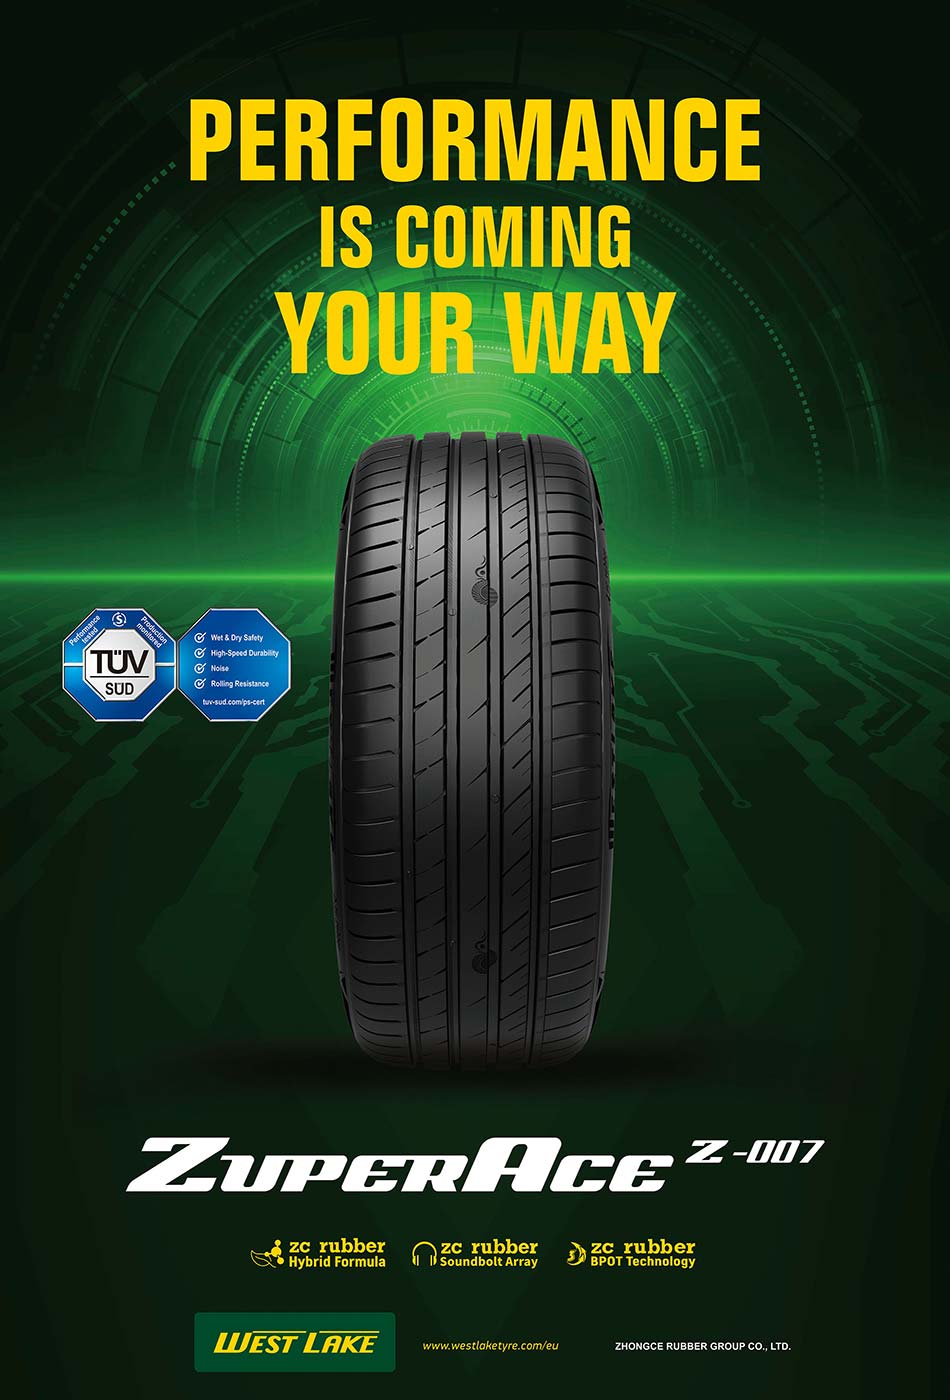 WESTLAKE launched New Flagship Tyre for Europe at Tire Cologne